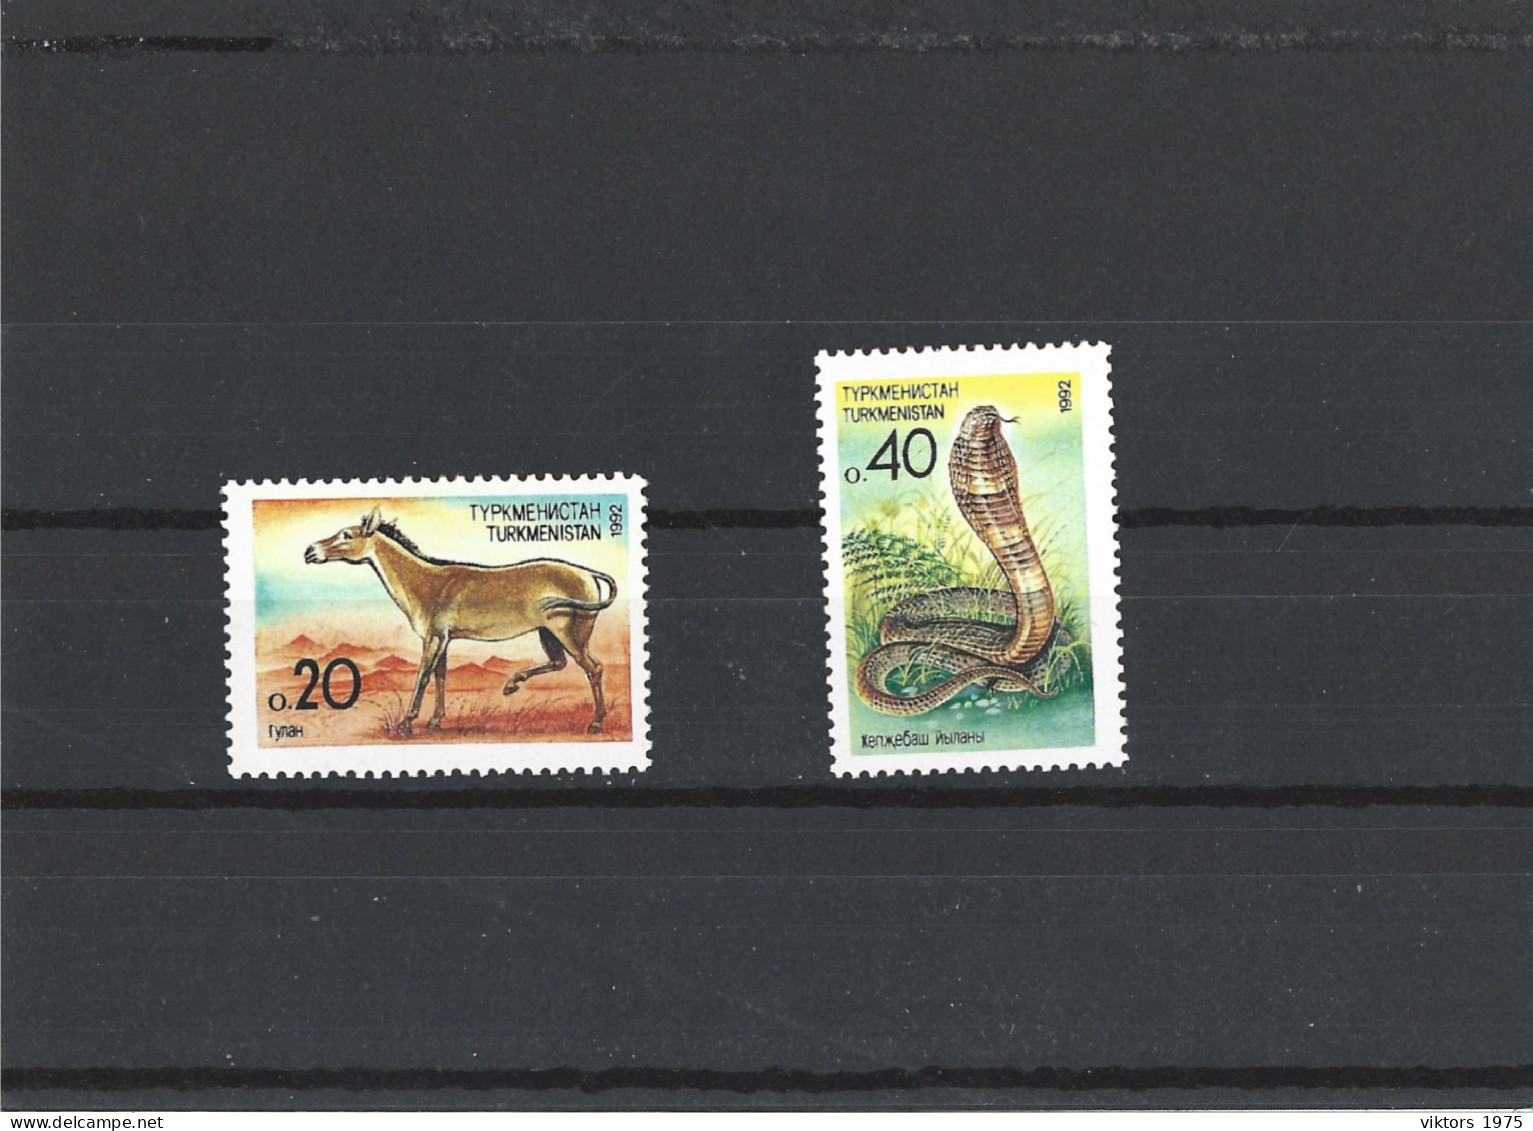 MNH Stamps Nr.2-3 In MICHEL Catalog - Turkménistan